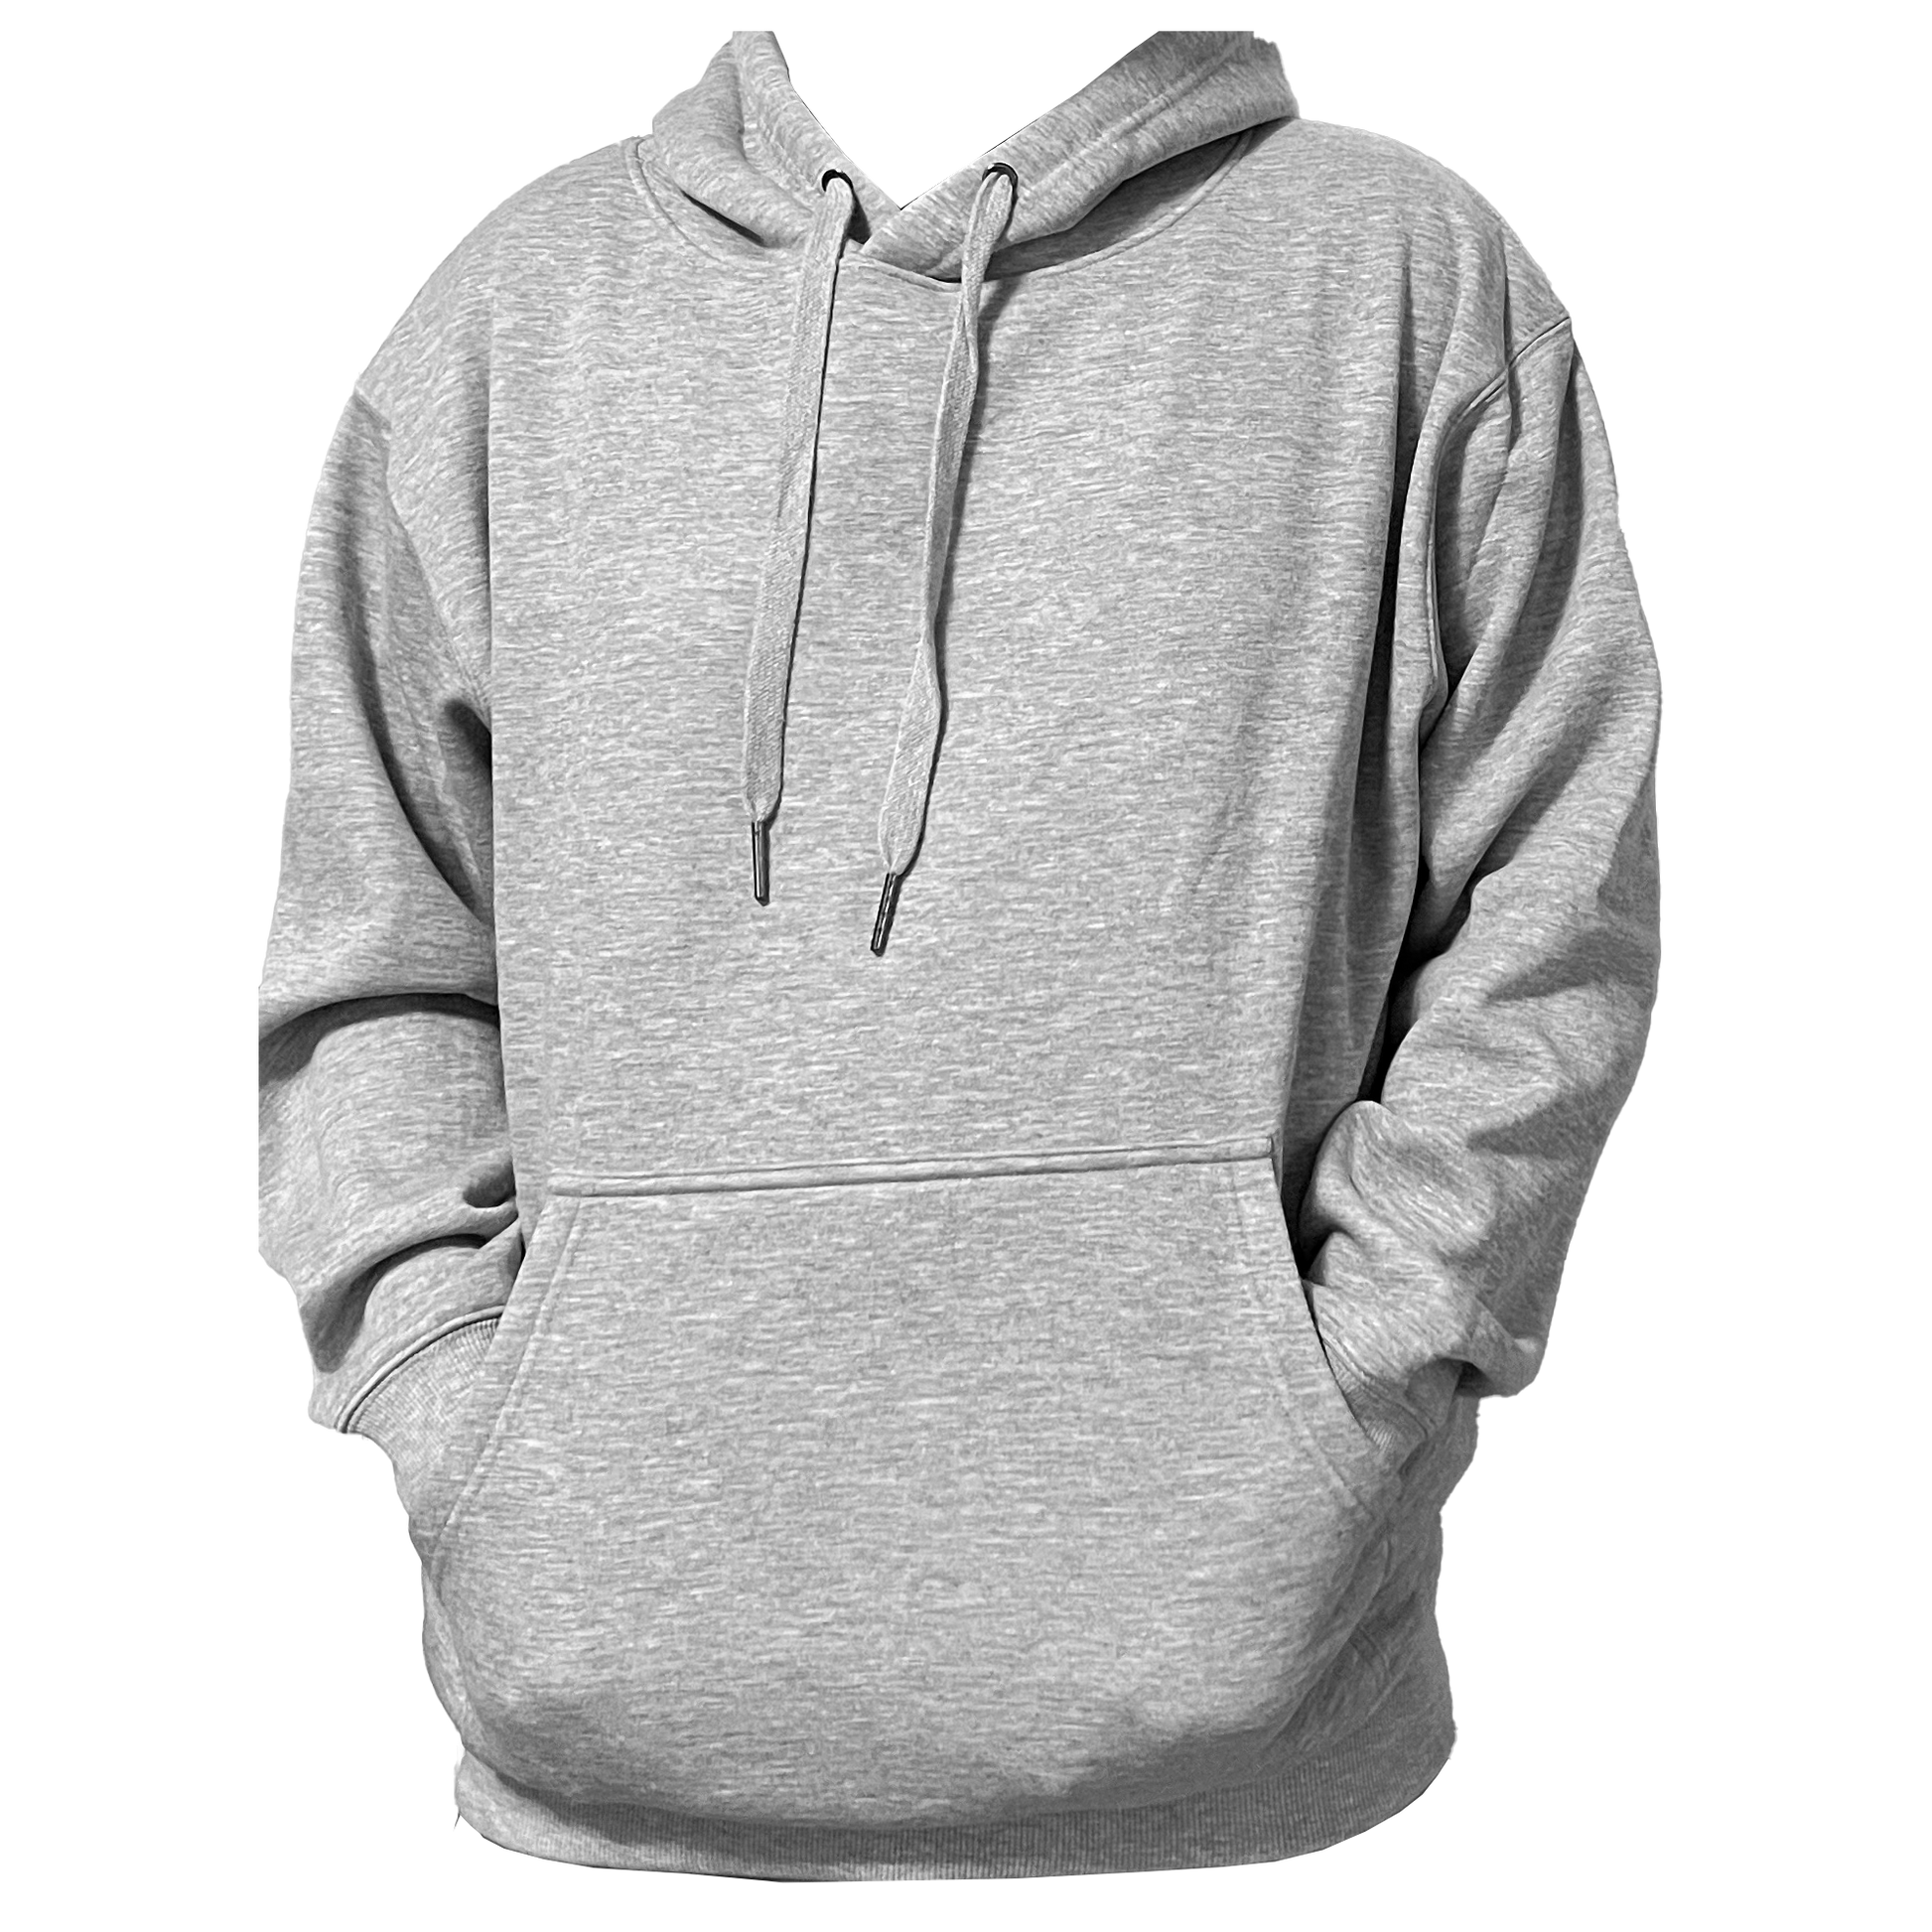 Pro West Fleece Heavyweight Thick Pullover Hoodie